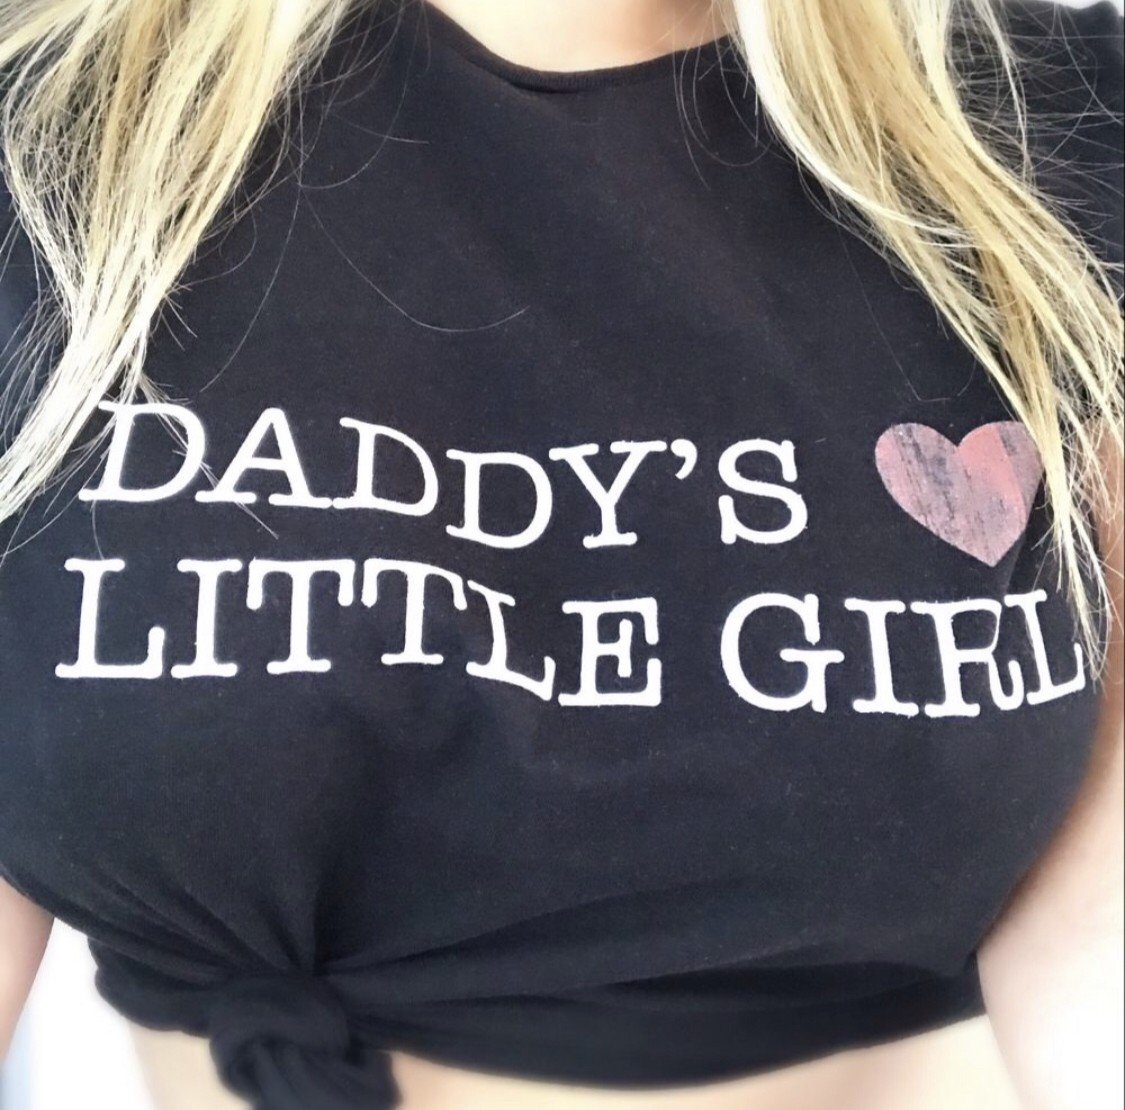 Photo by Kitten with the username @daddysirslittleslut, who is a verified user,  April 23, 2020 at 1:59 PM and the text says 'Always❤️ #daddysirslittleslut #submissive #littleone'